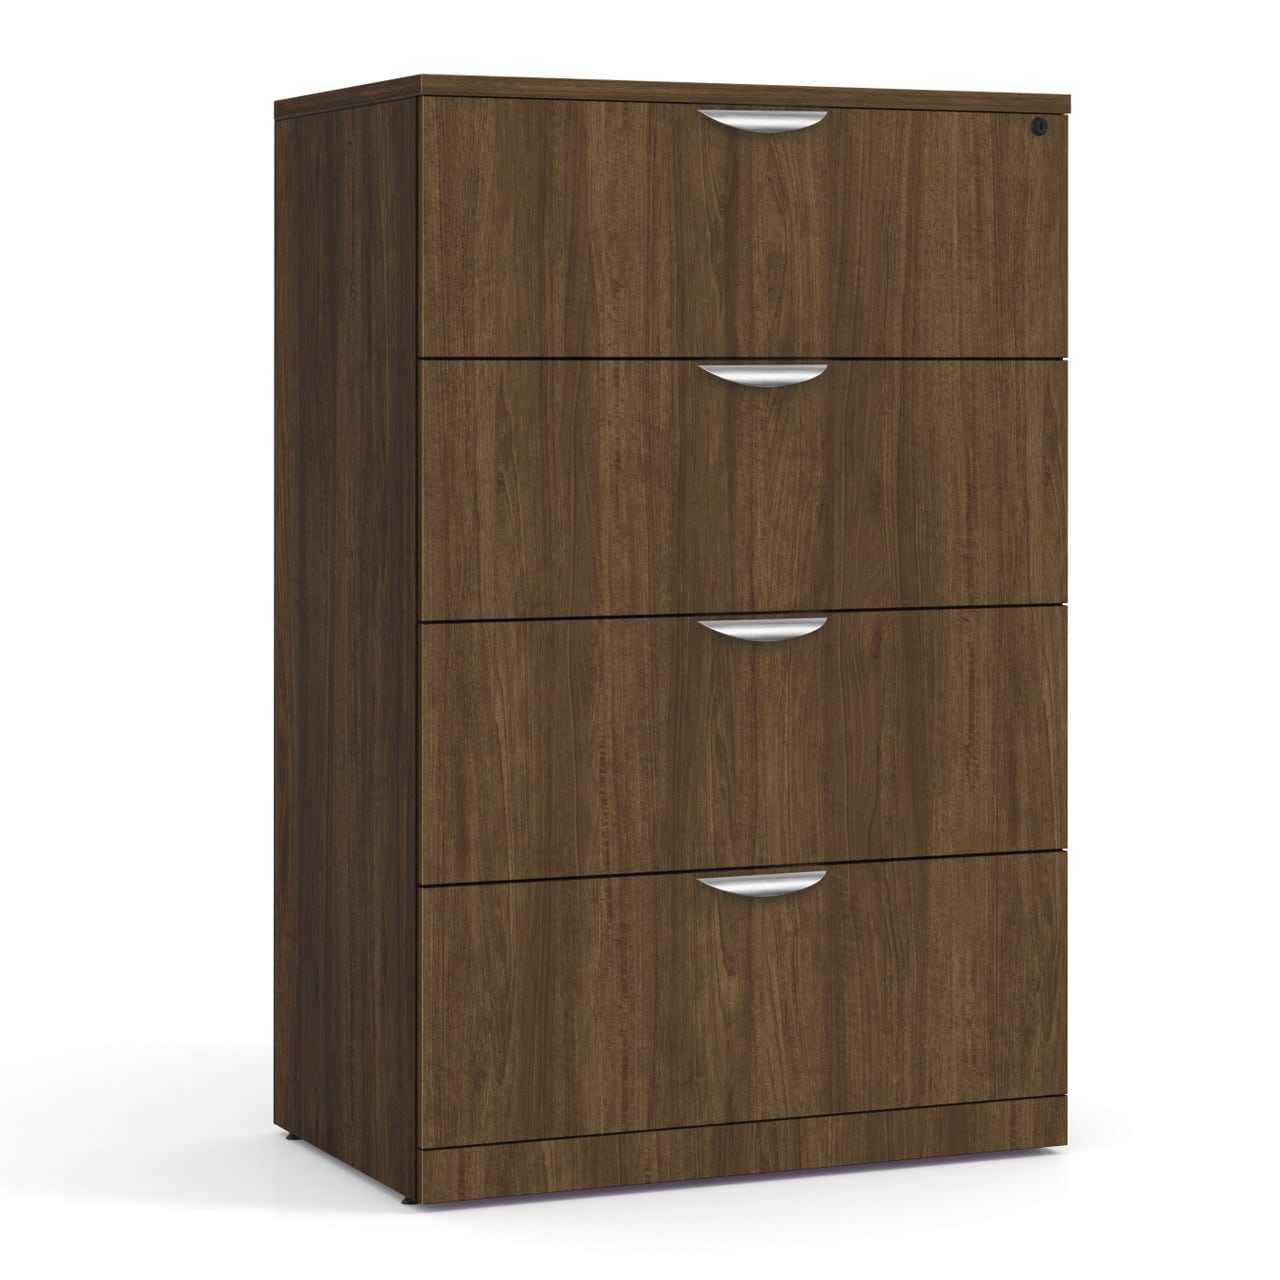 NEW 4 drawer lateral in walnut laminate with silver handles